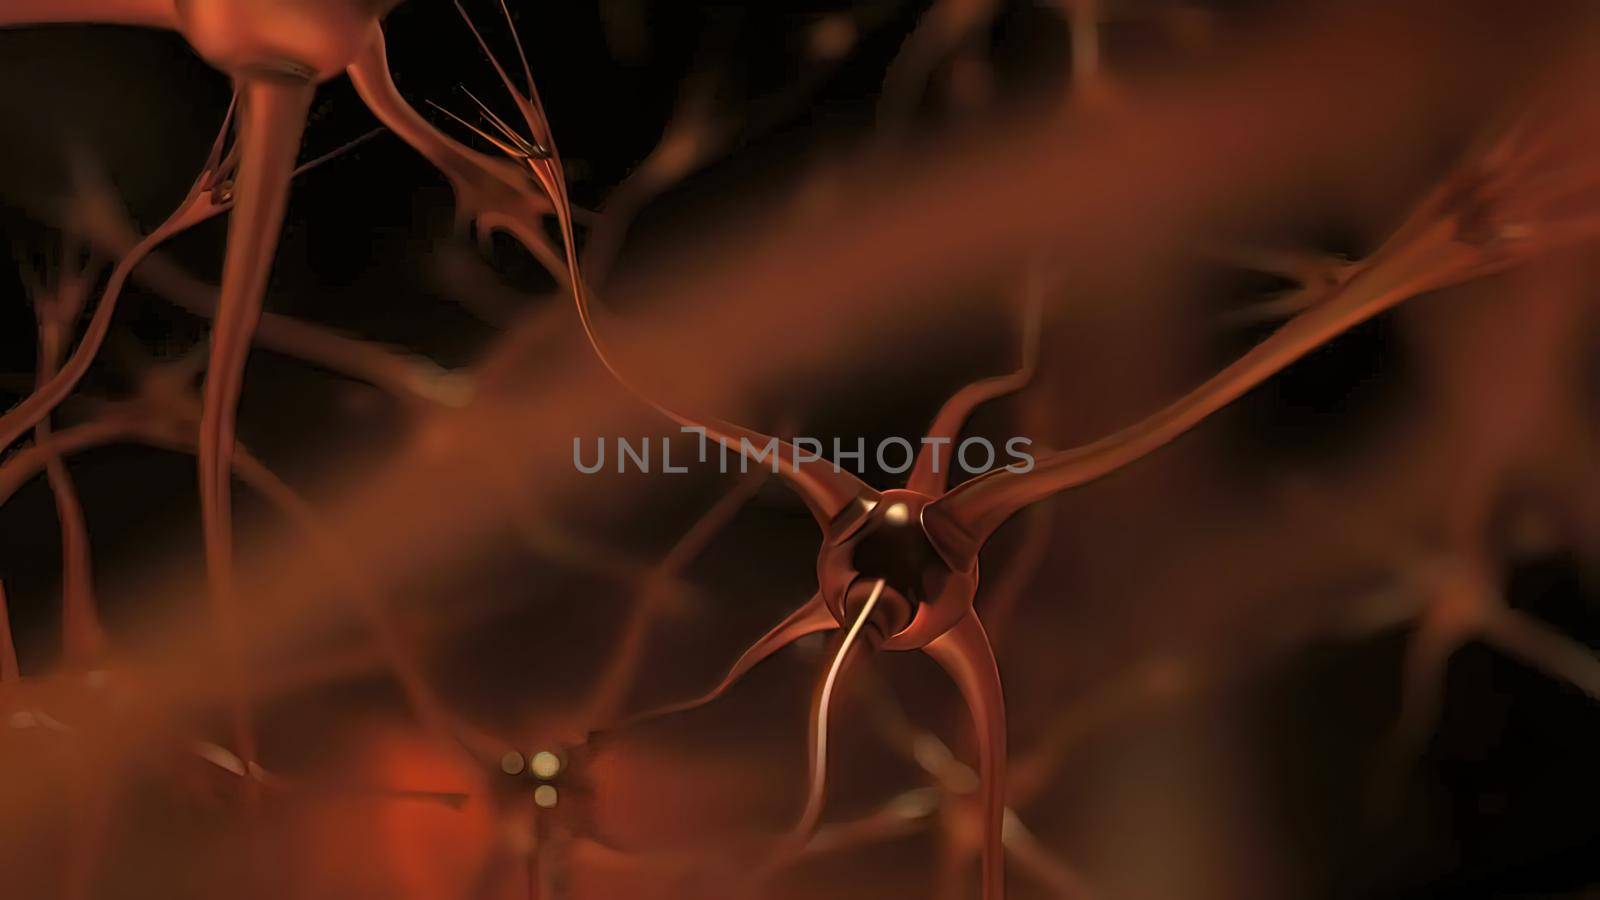 Real Purple Neuron synapse network 3D . Multiple angles of electrical impulses between neurons. 3d illustration